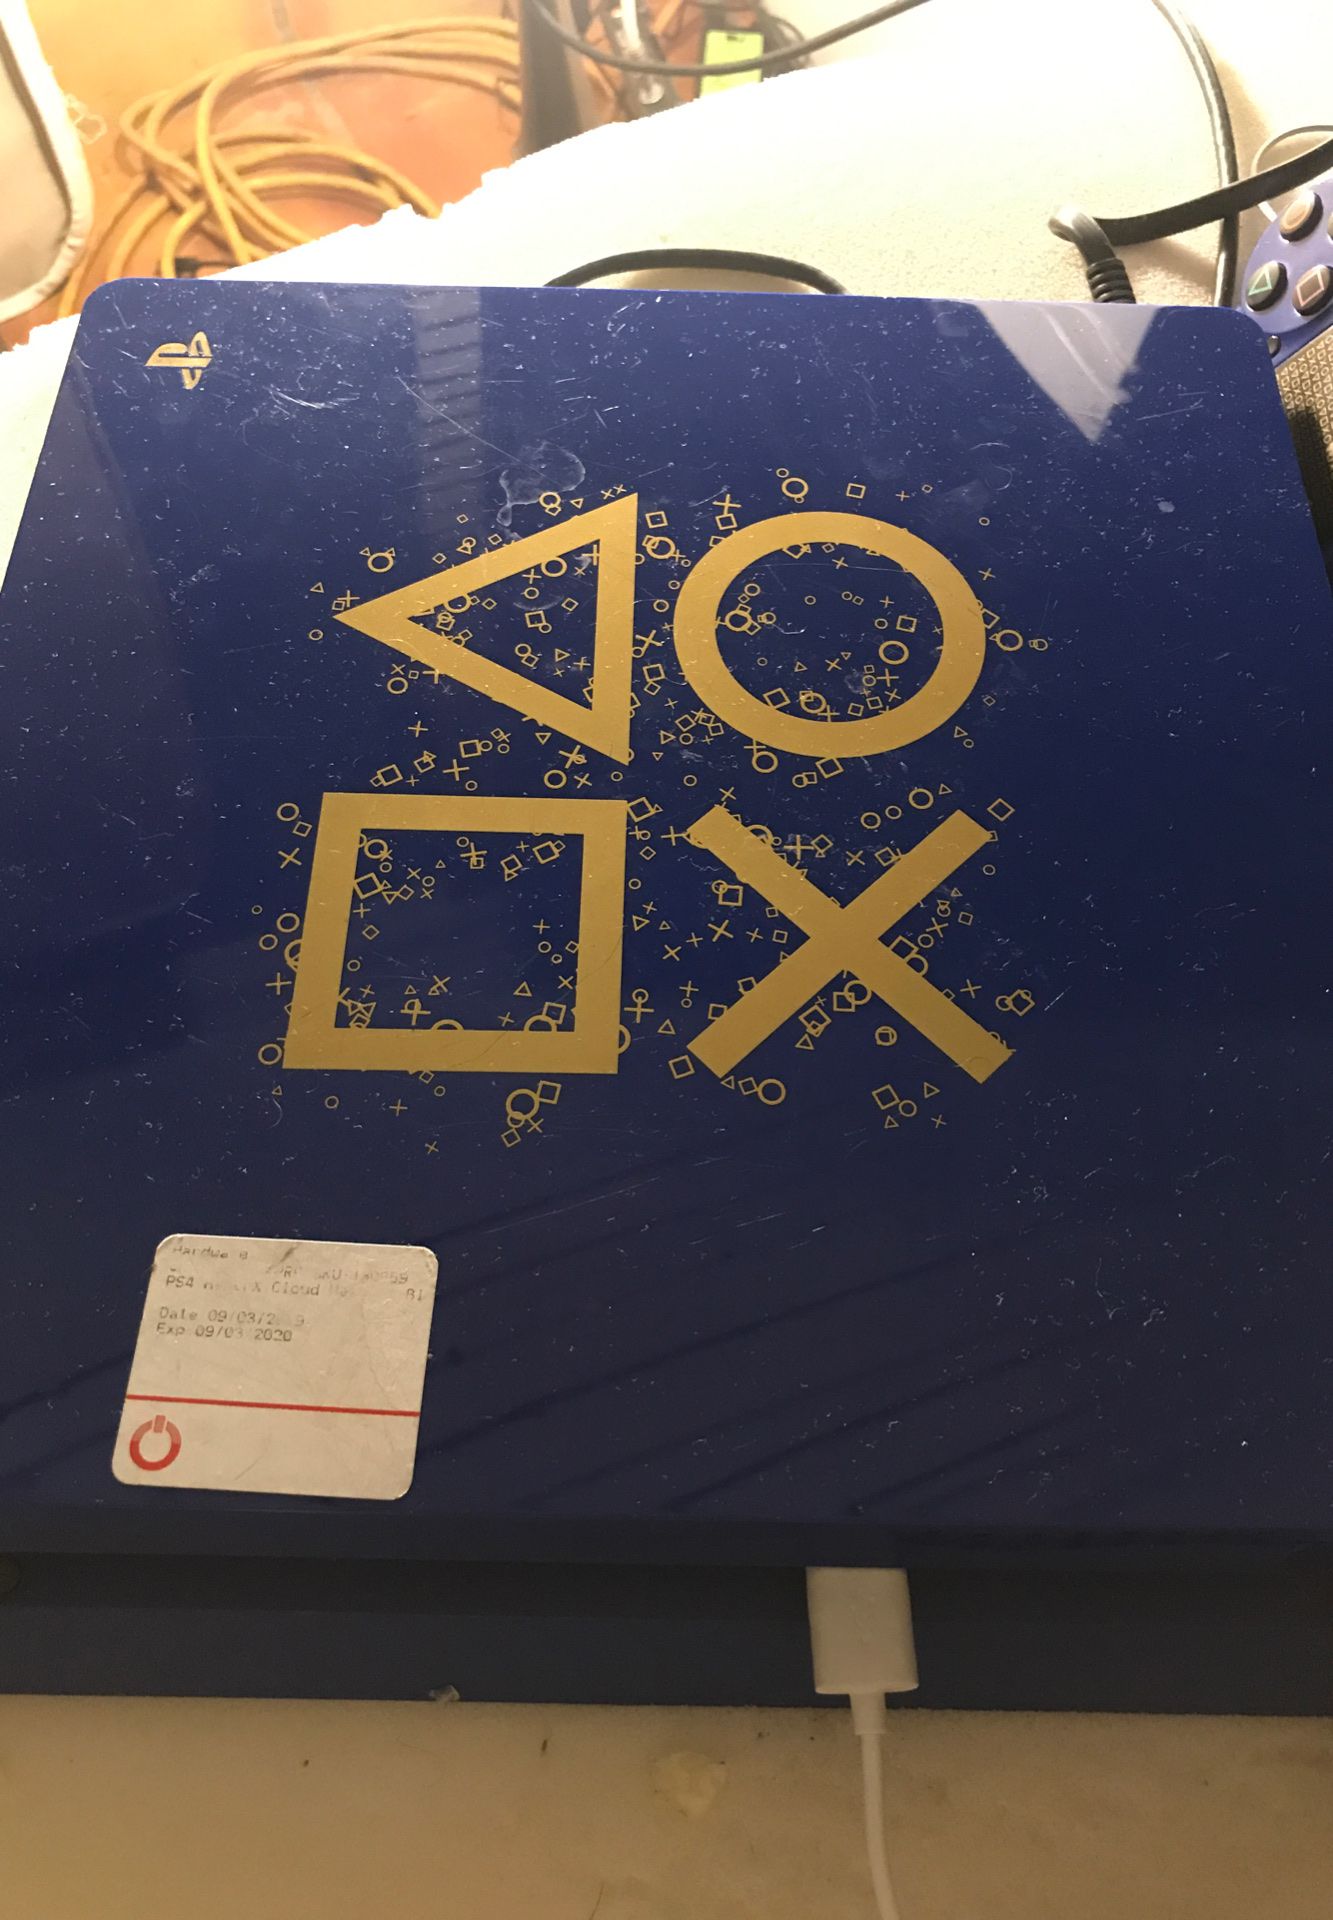 Limited edition ps4